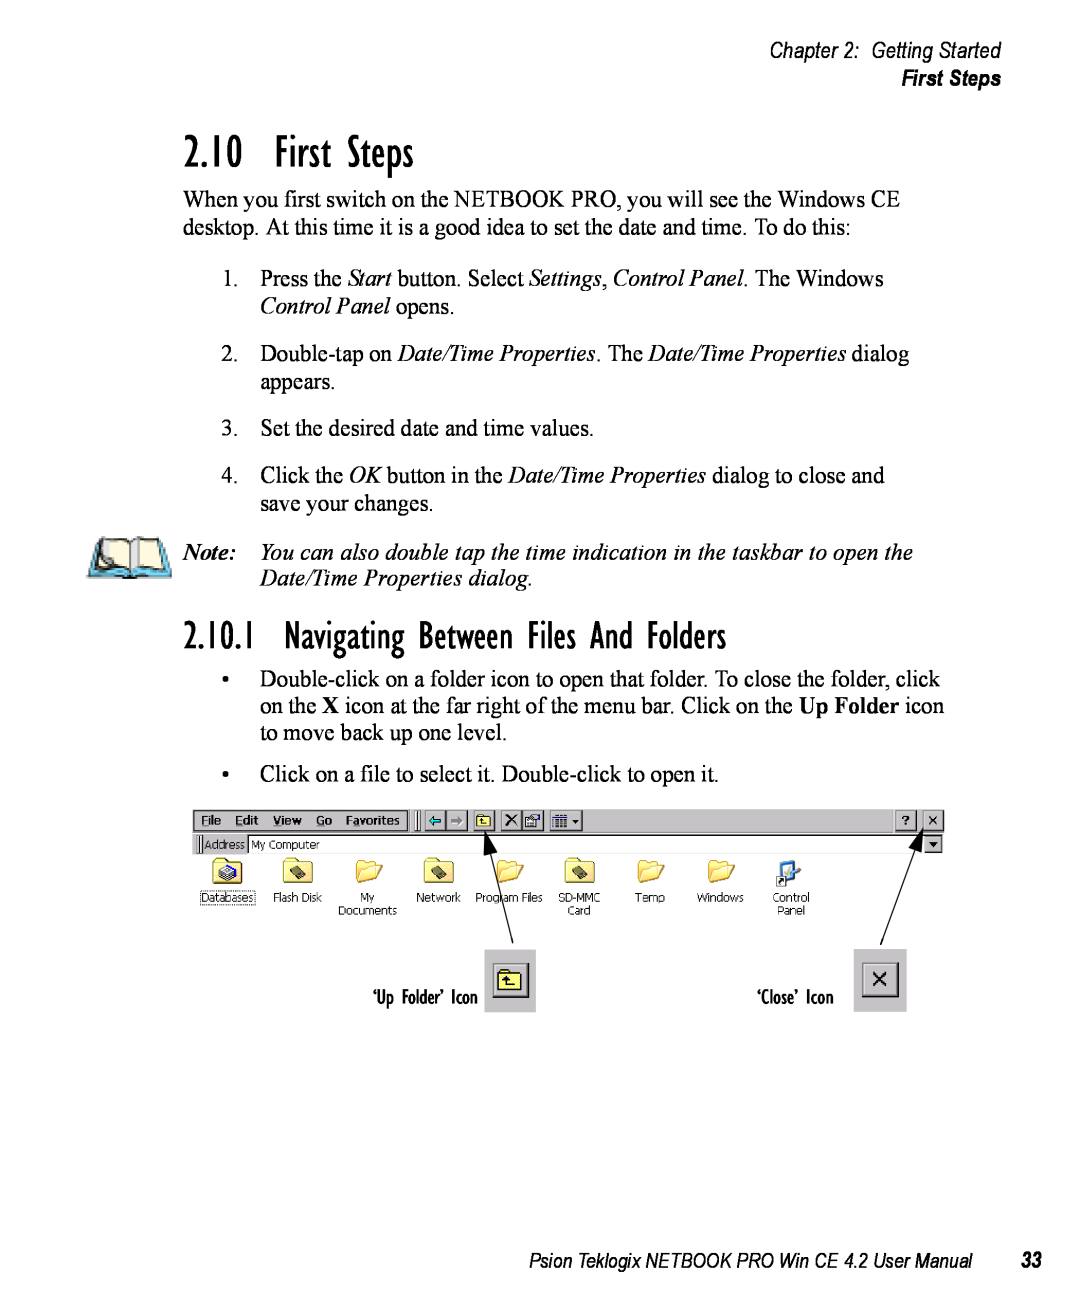 Psion Teklogix Win CE 4.2 user manual First Steps, Navigating Between Files And Folders, Getting Started 